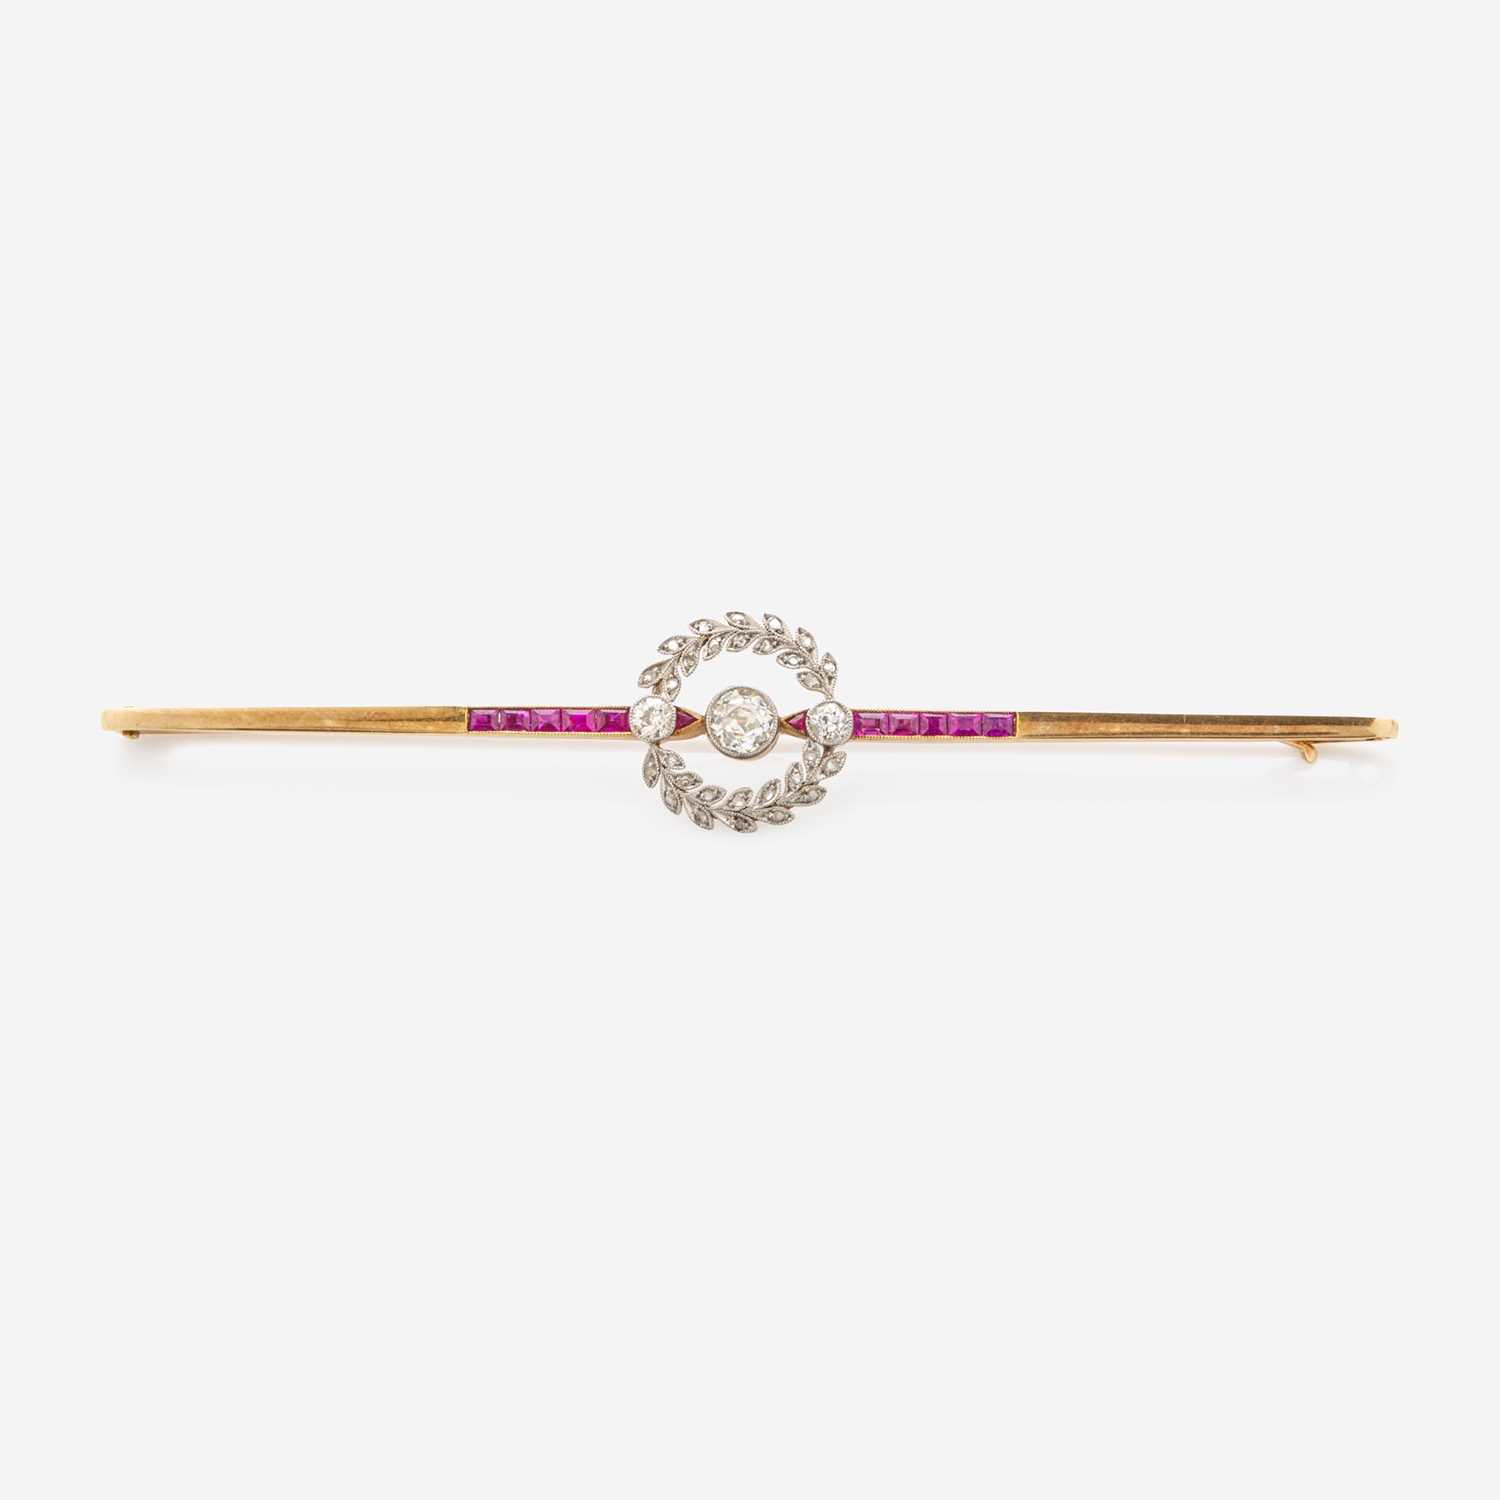 Lot 9 - A 14K Yellow Gold, Platinum, Ruby, and Diamond Brooch